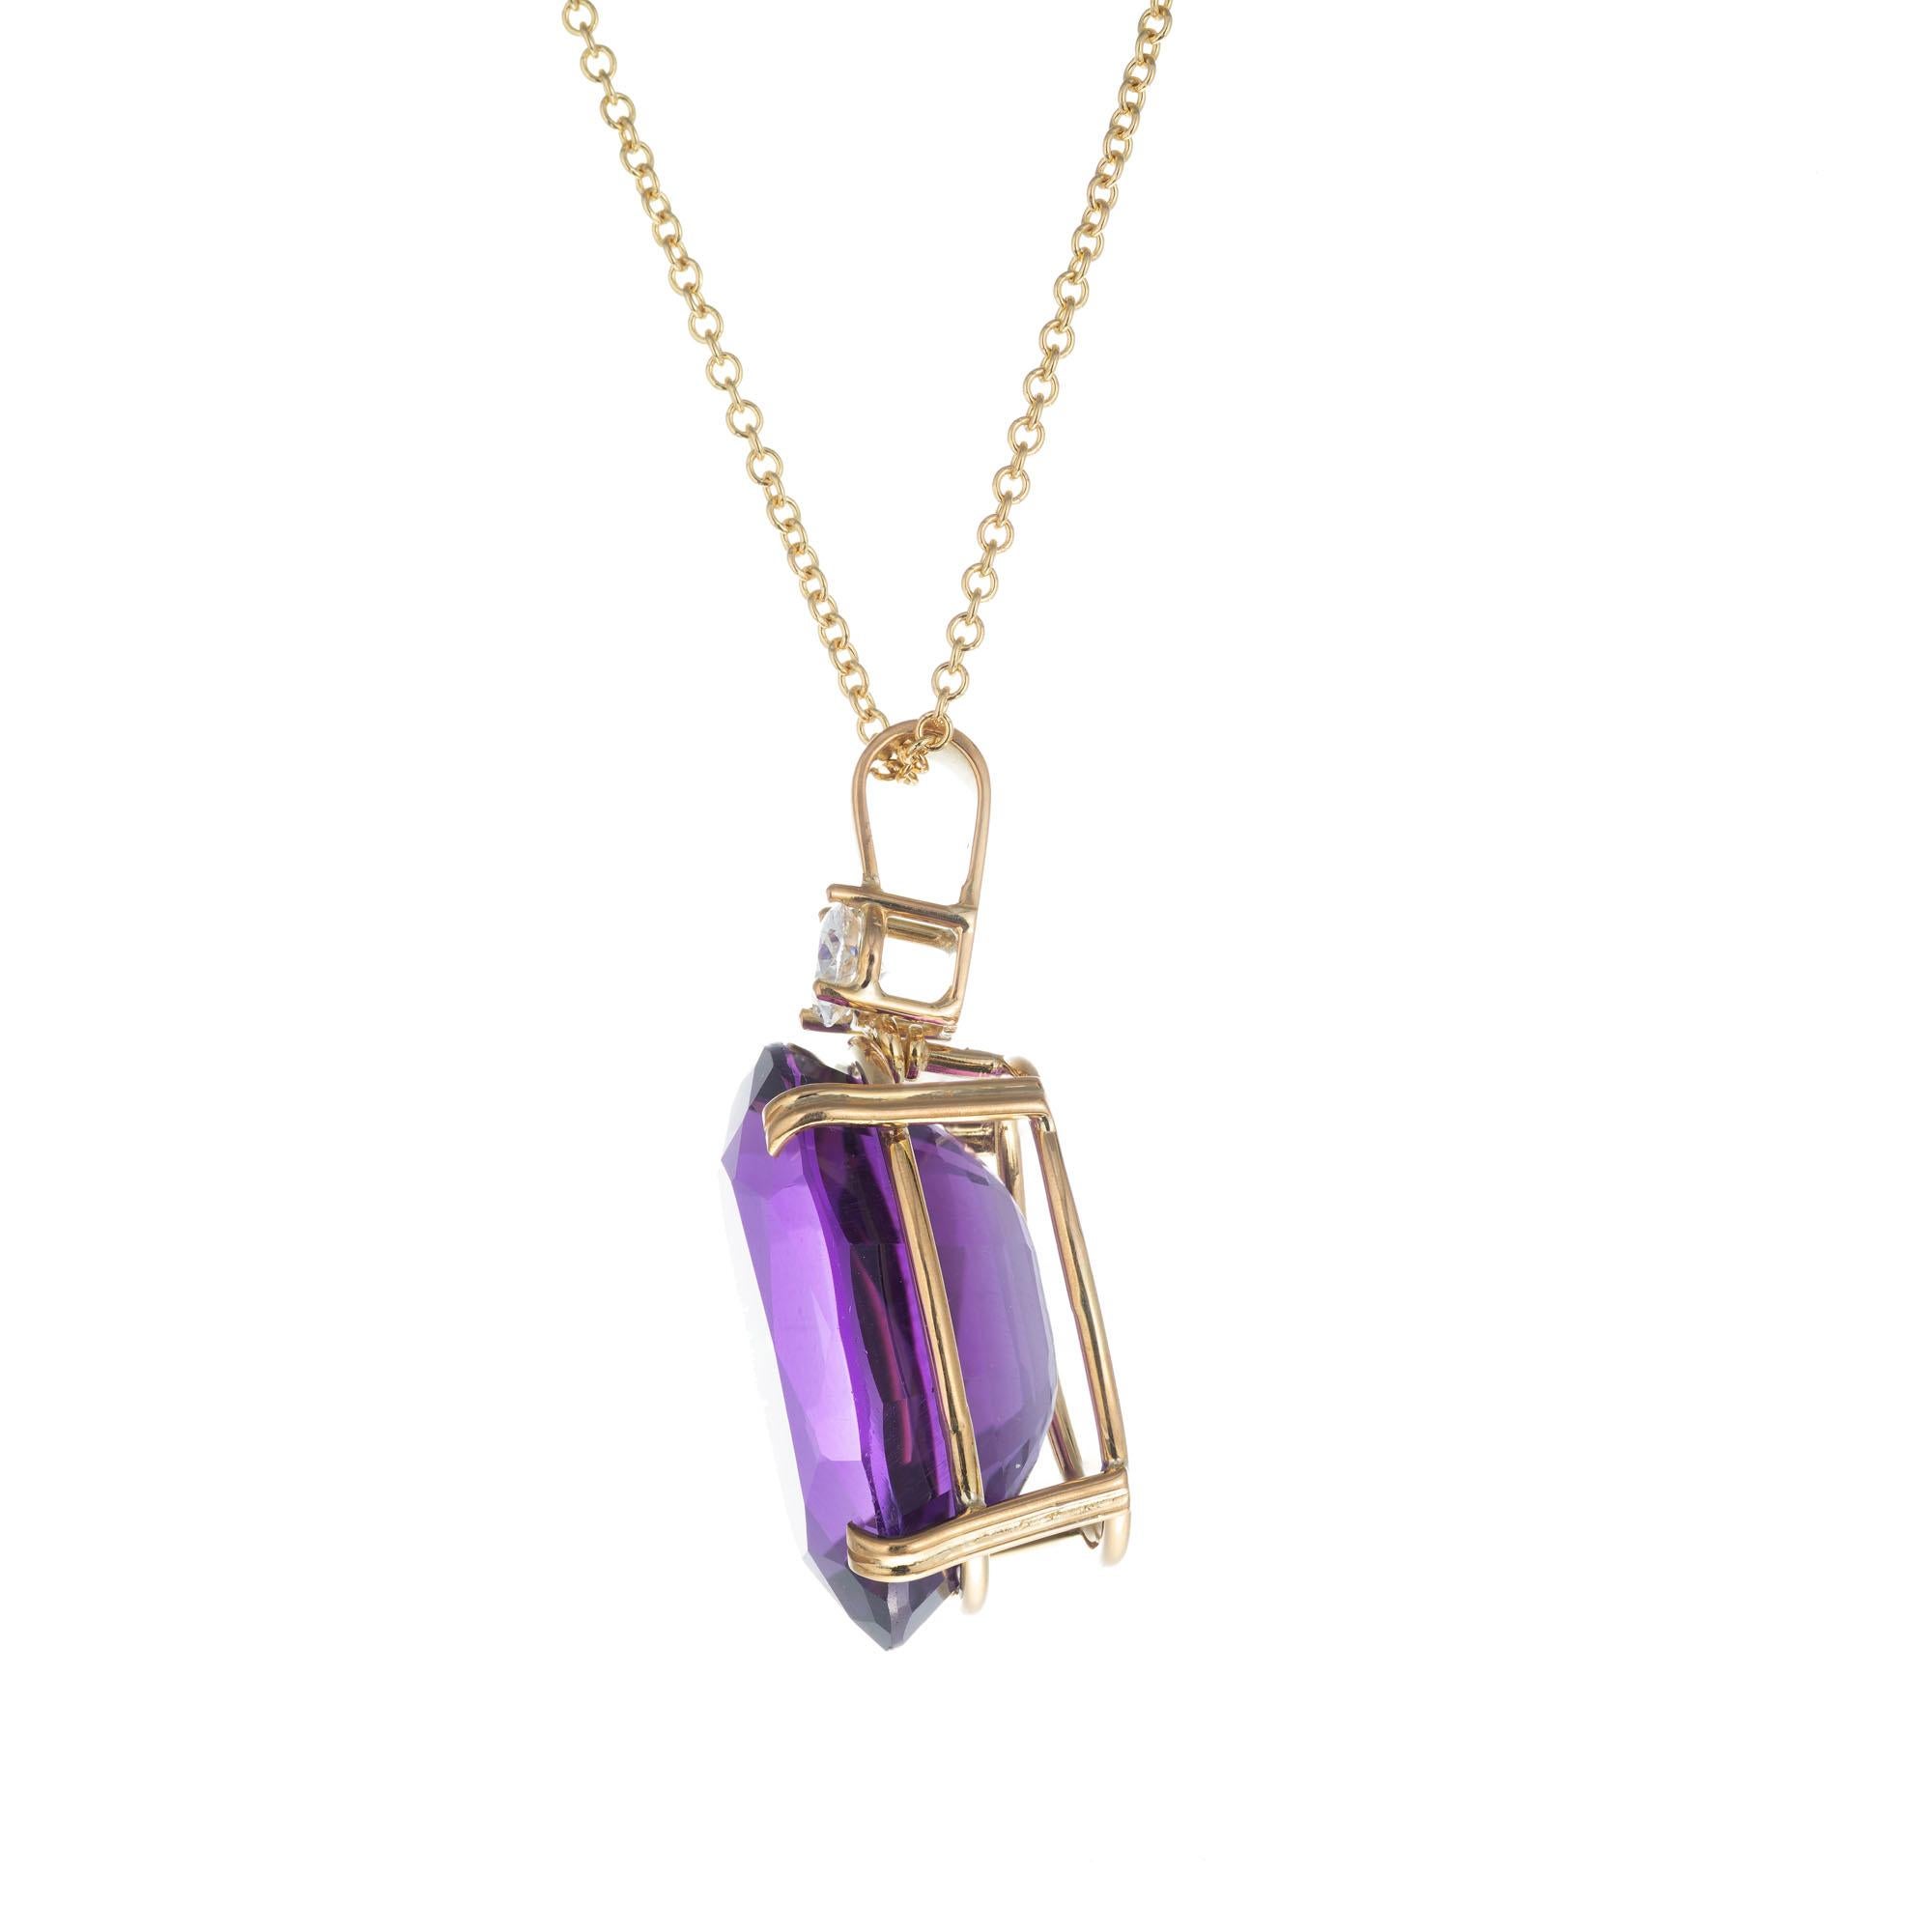 Peter Suchy 18.42 Carat Amethyst Diamond Yellow Gold Pendant Necklace For Sale 2